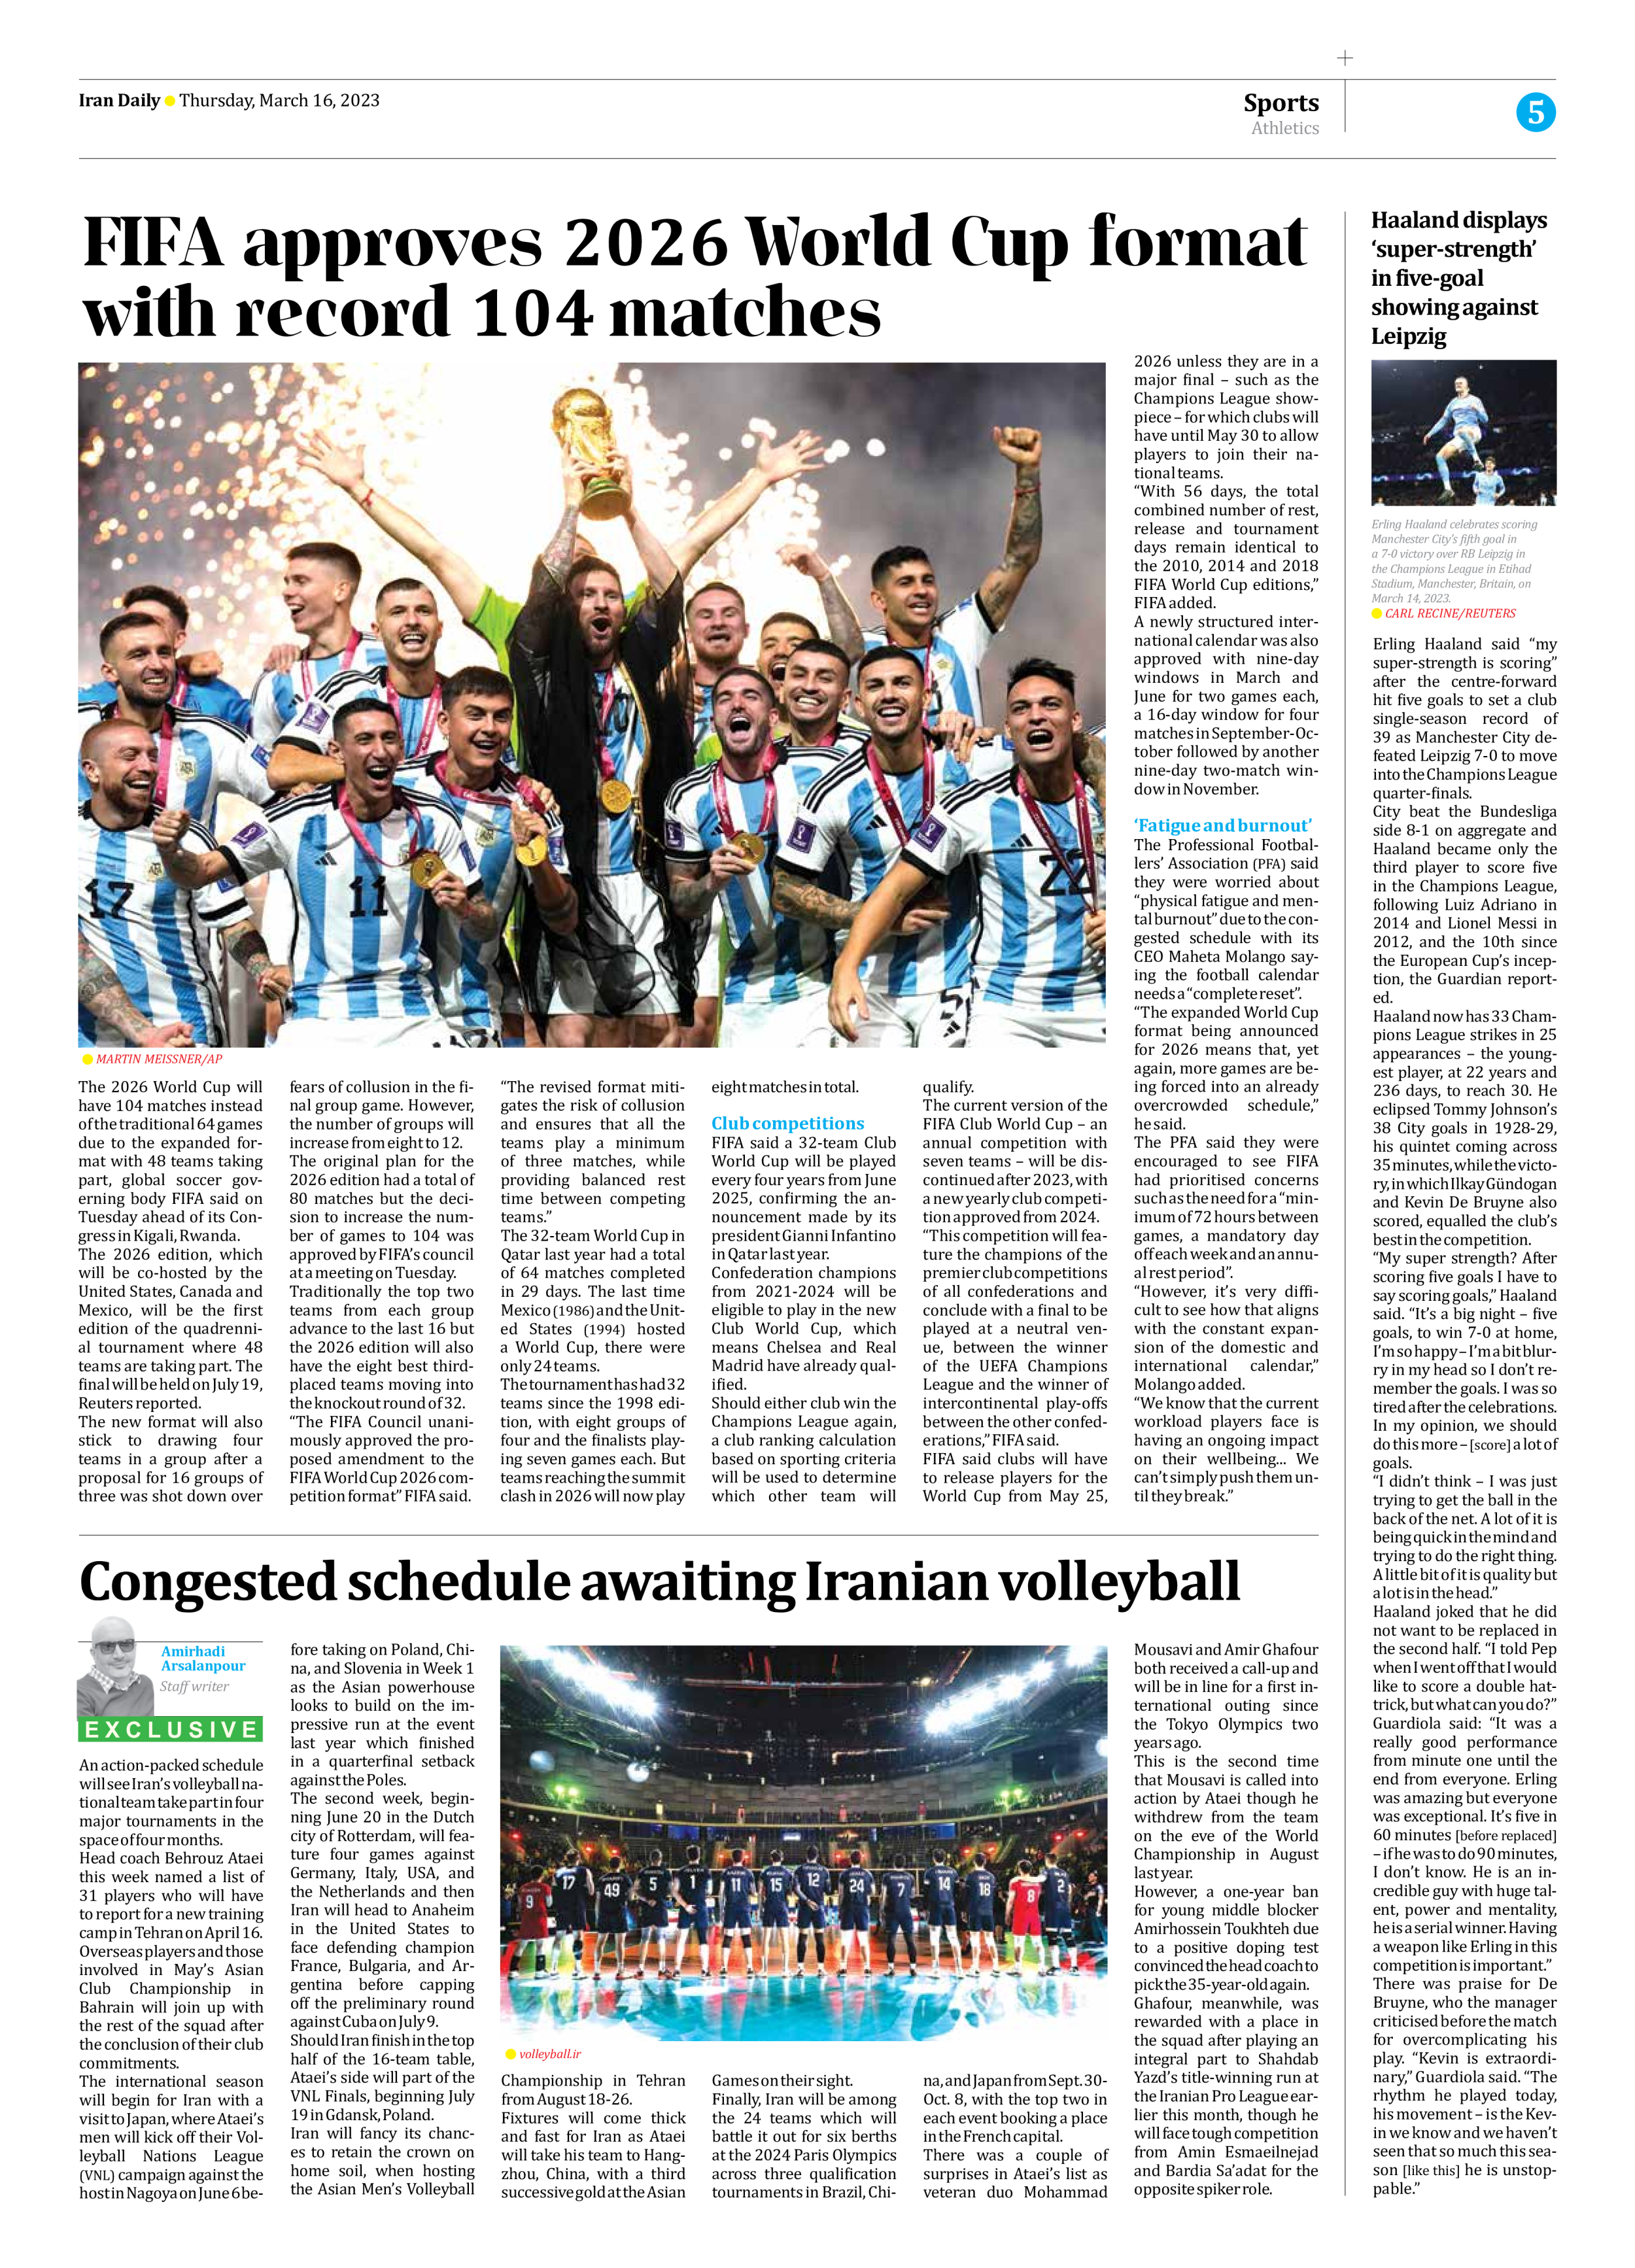 Iran Daily - Number Seven Thousand Two Hundred and Fifty Nine - 16 March 2023 - Page 5